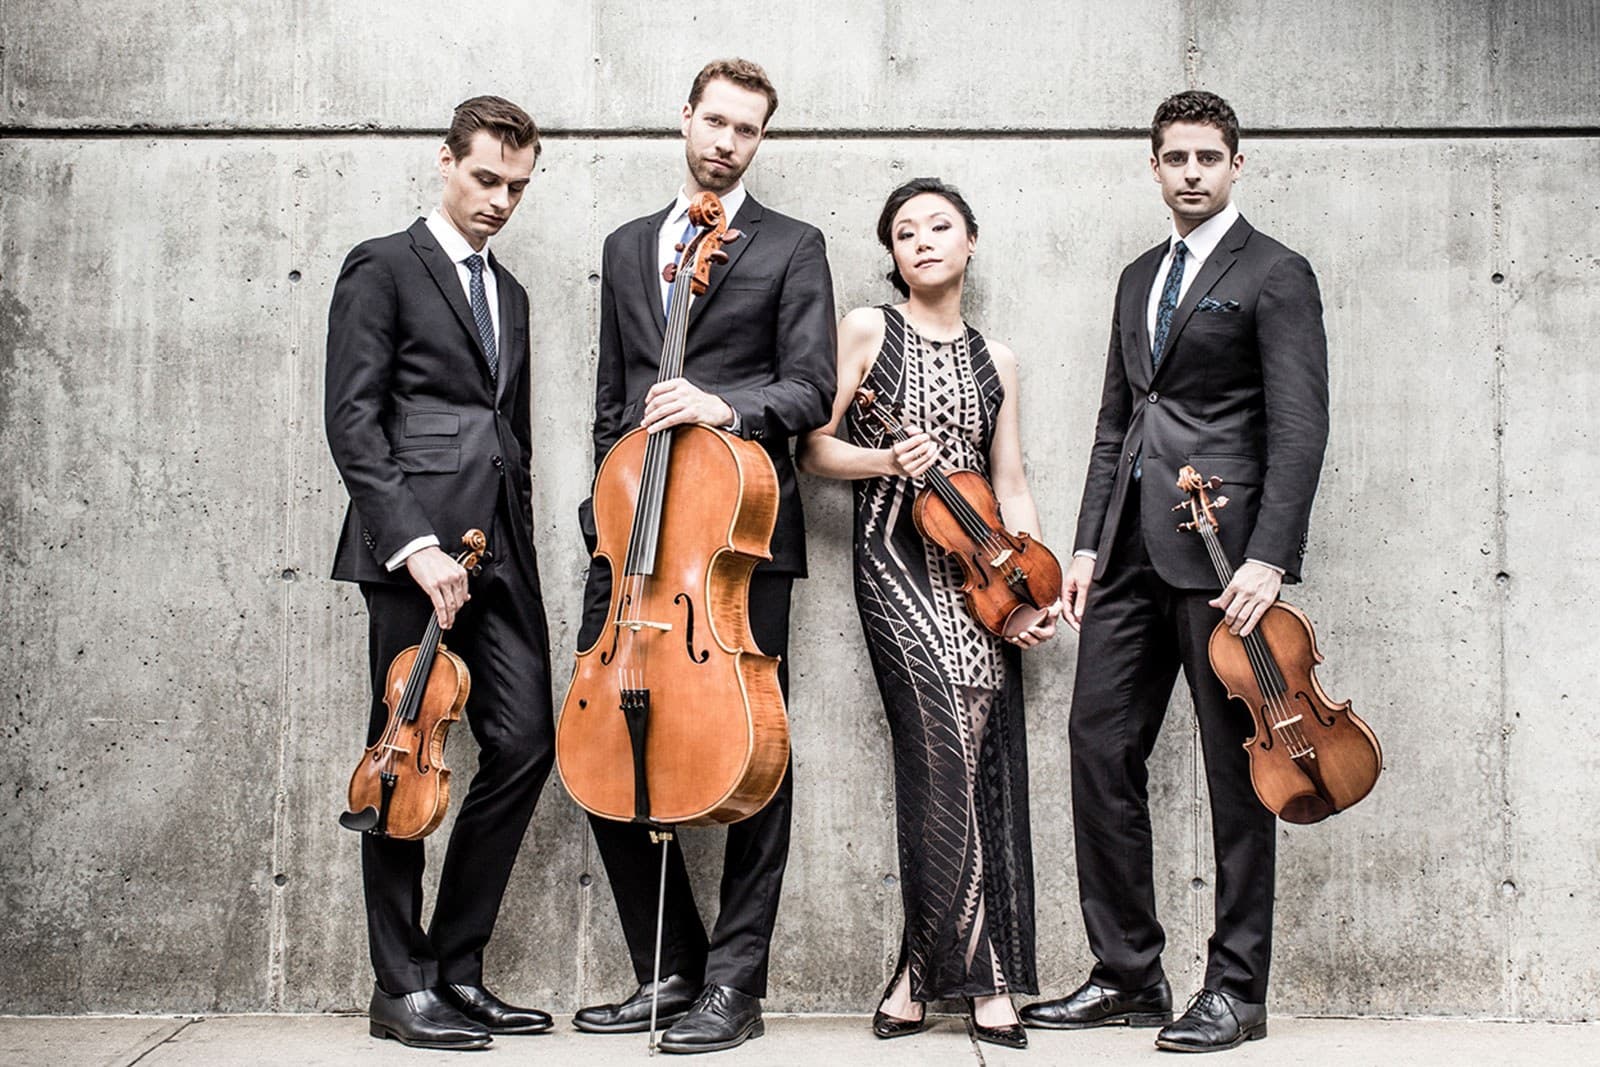 Three men and a women pose against a wall holding violins and a cello.